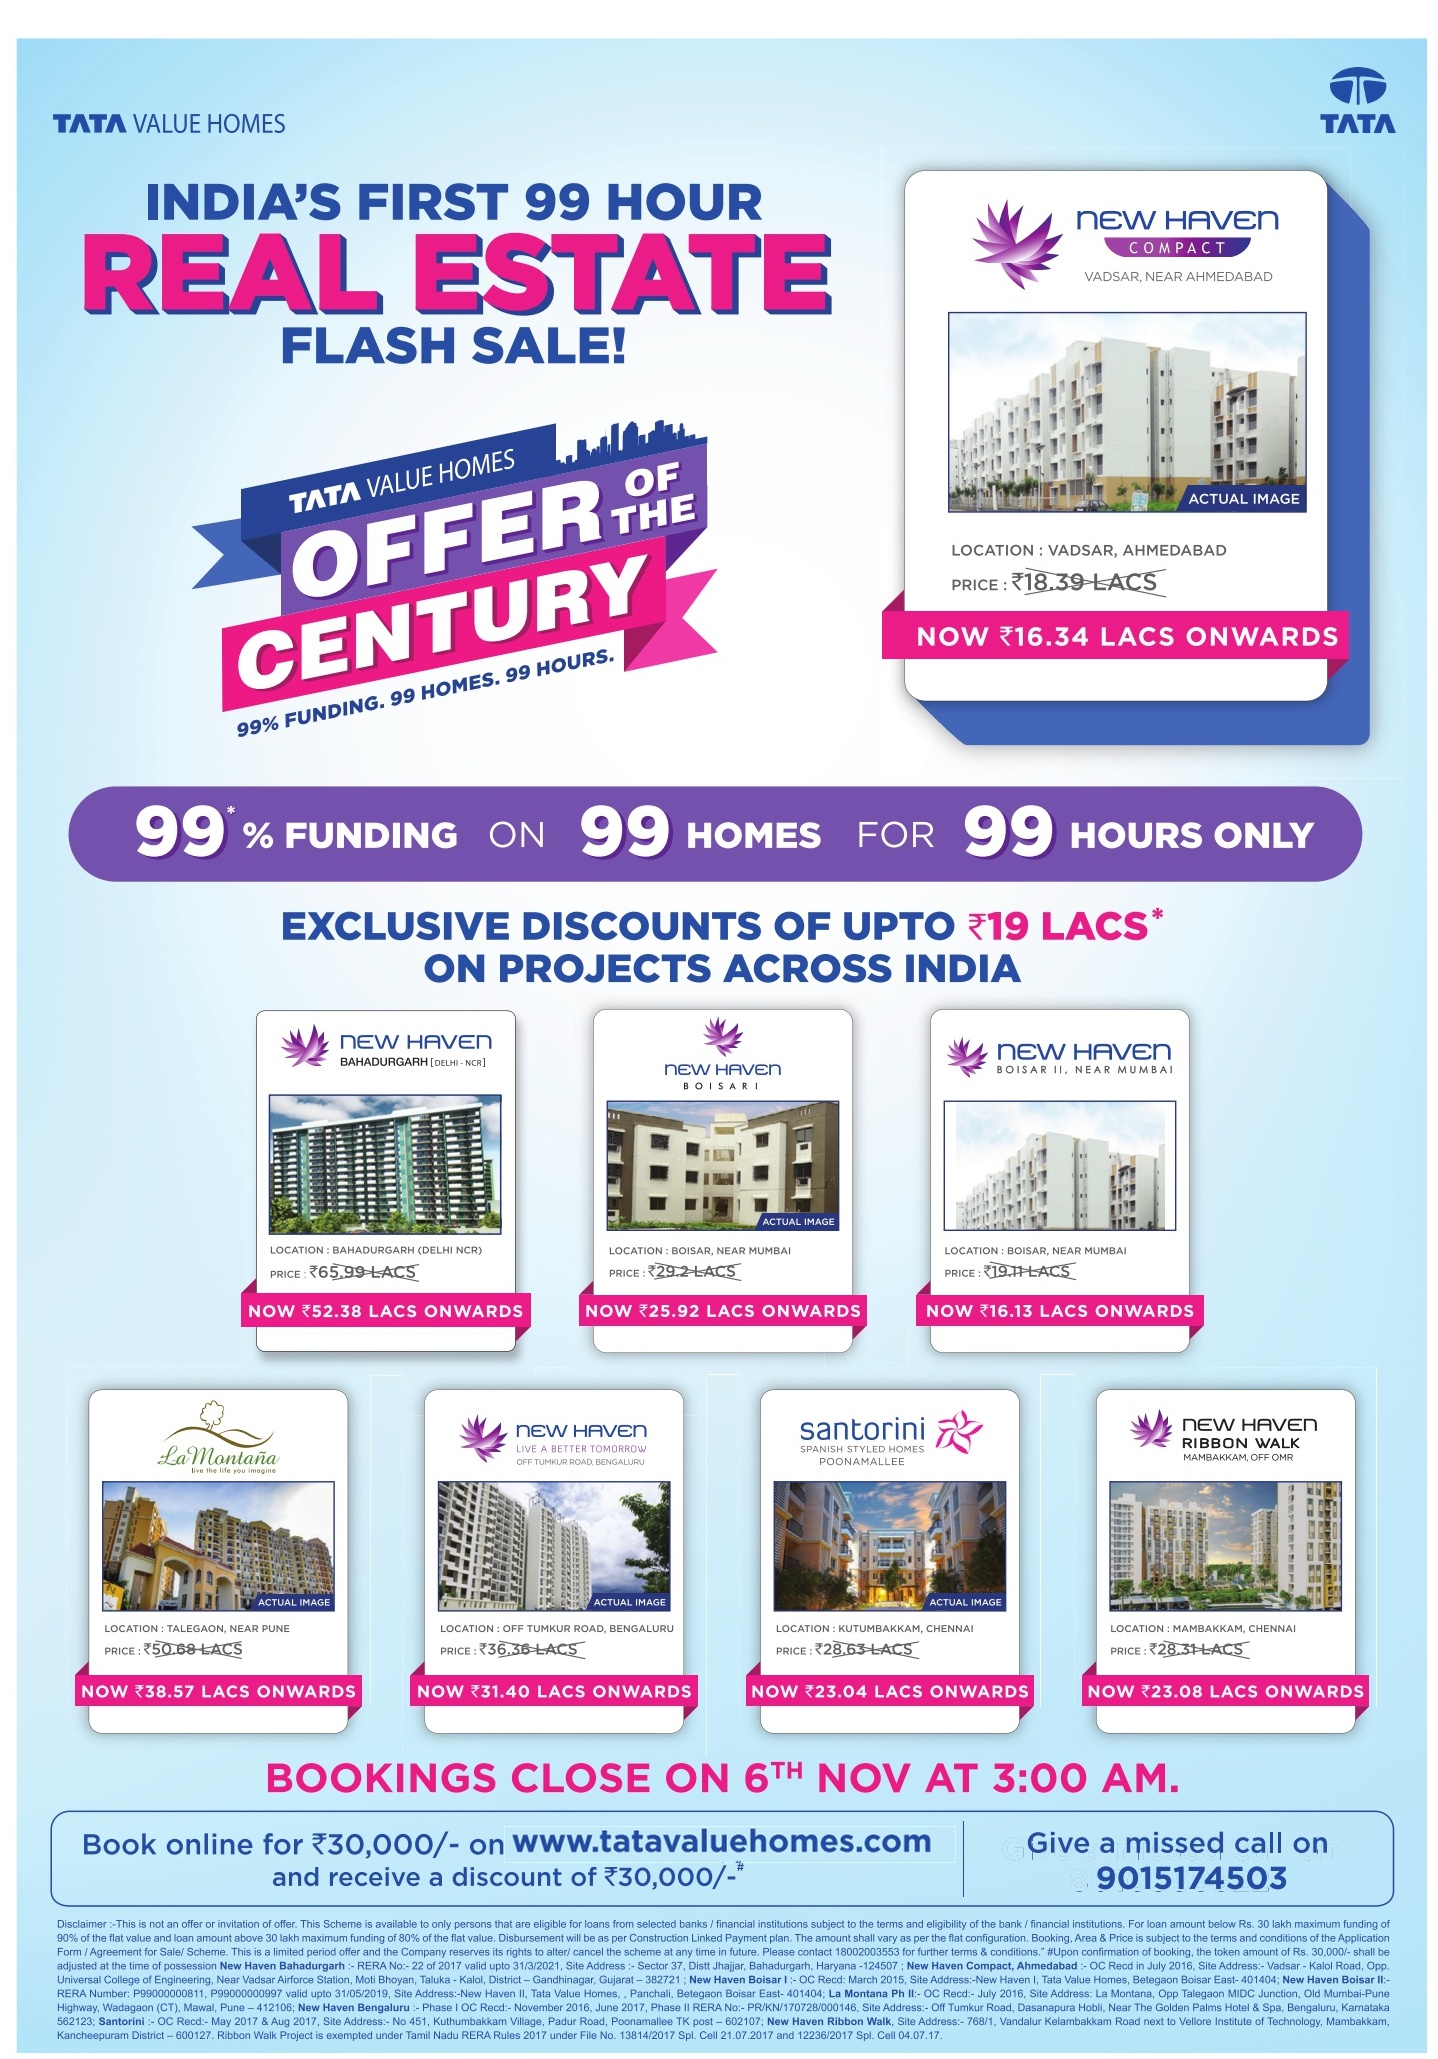 Tata Value Home Indias First 99 Hour Real Estate Flash Sale Ad - Advert ...